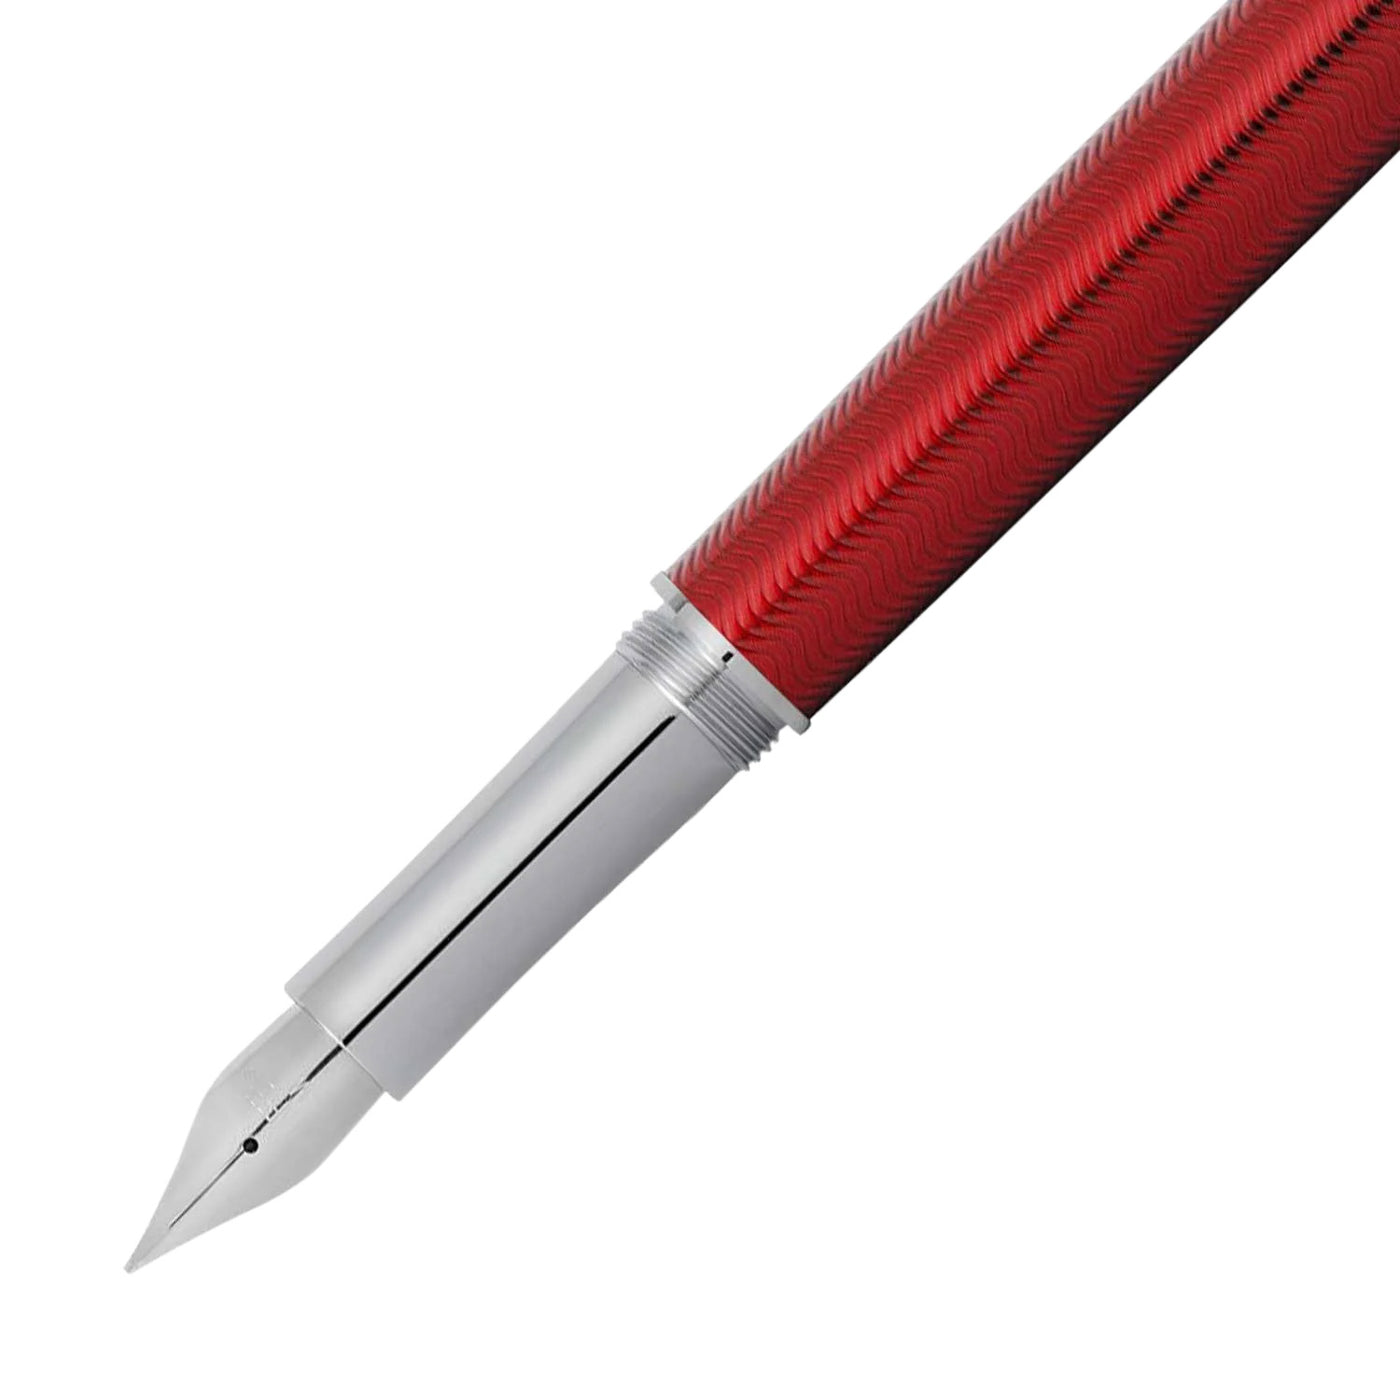 Sheaffer Intensity Fountain Pen - Translucent Red CT 2